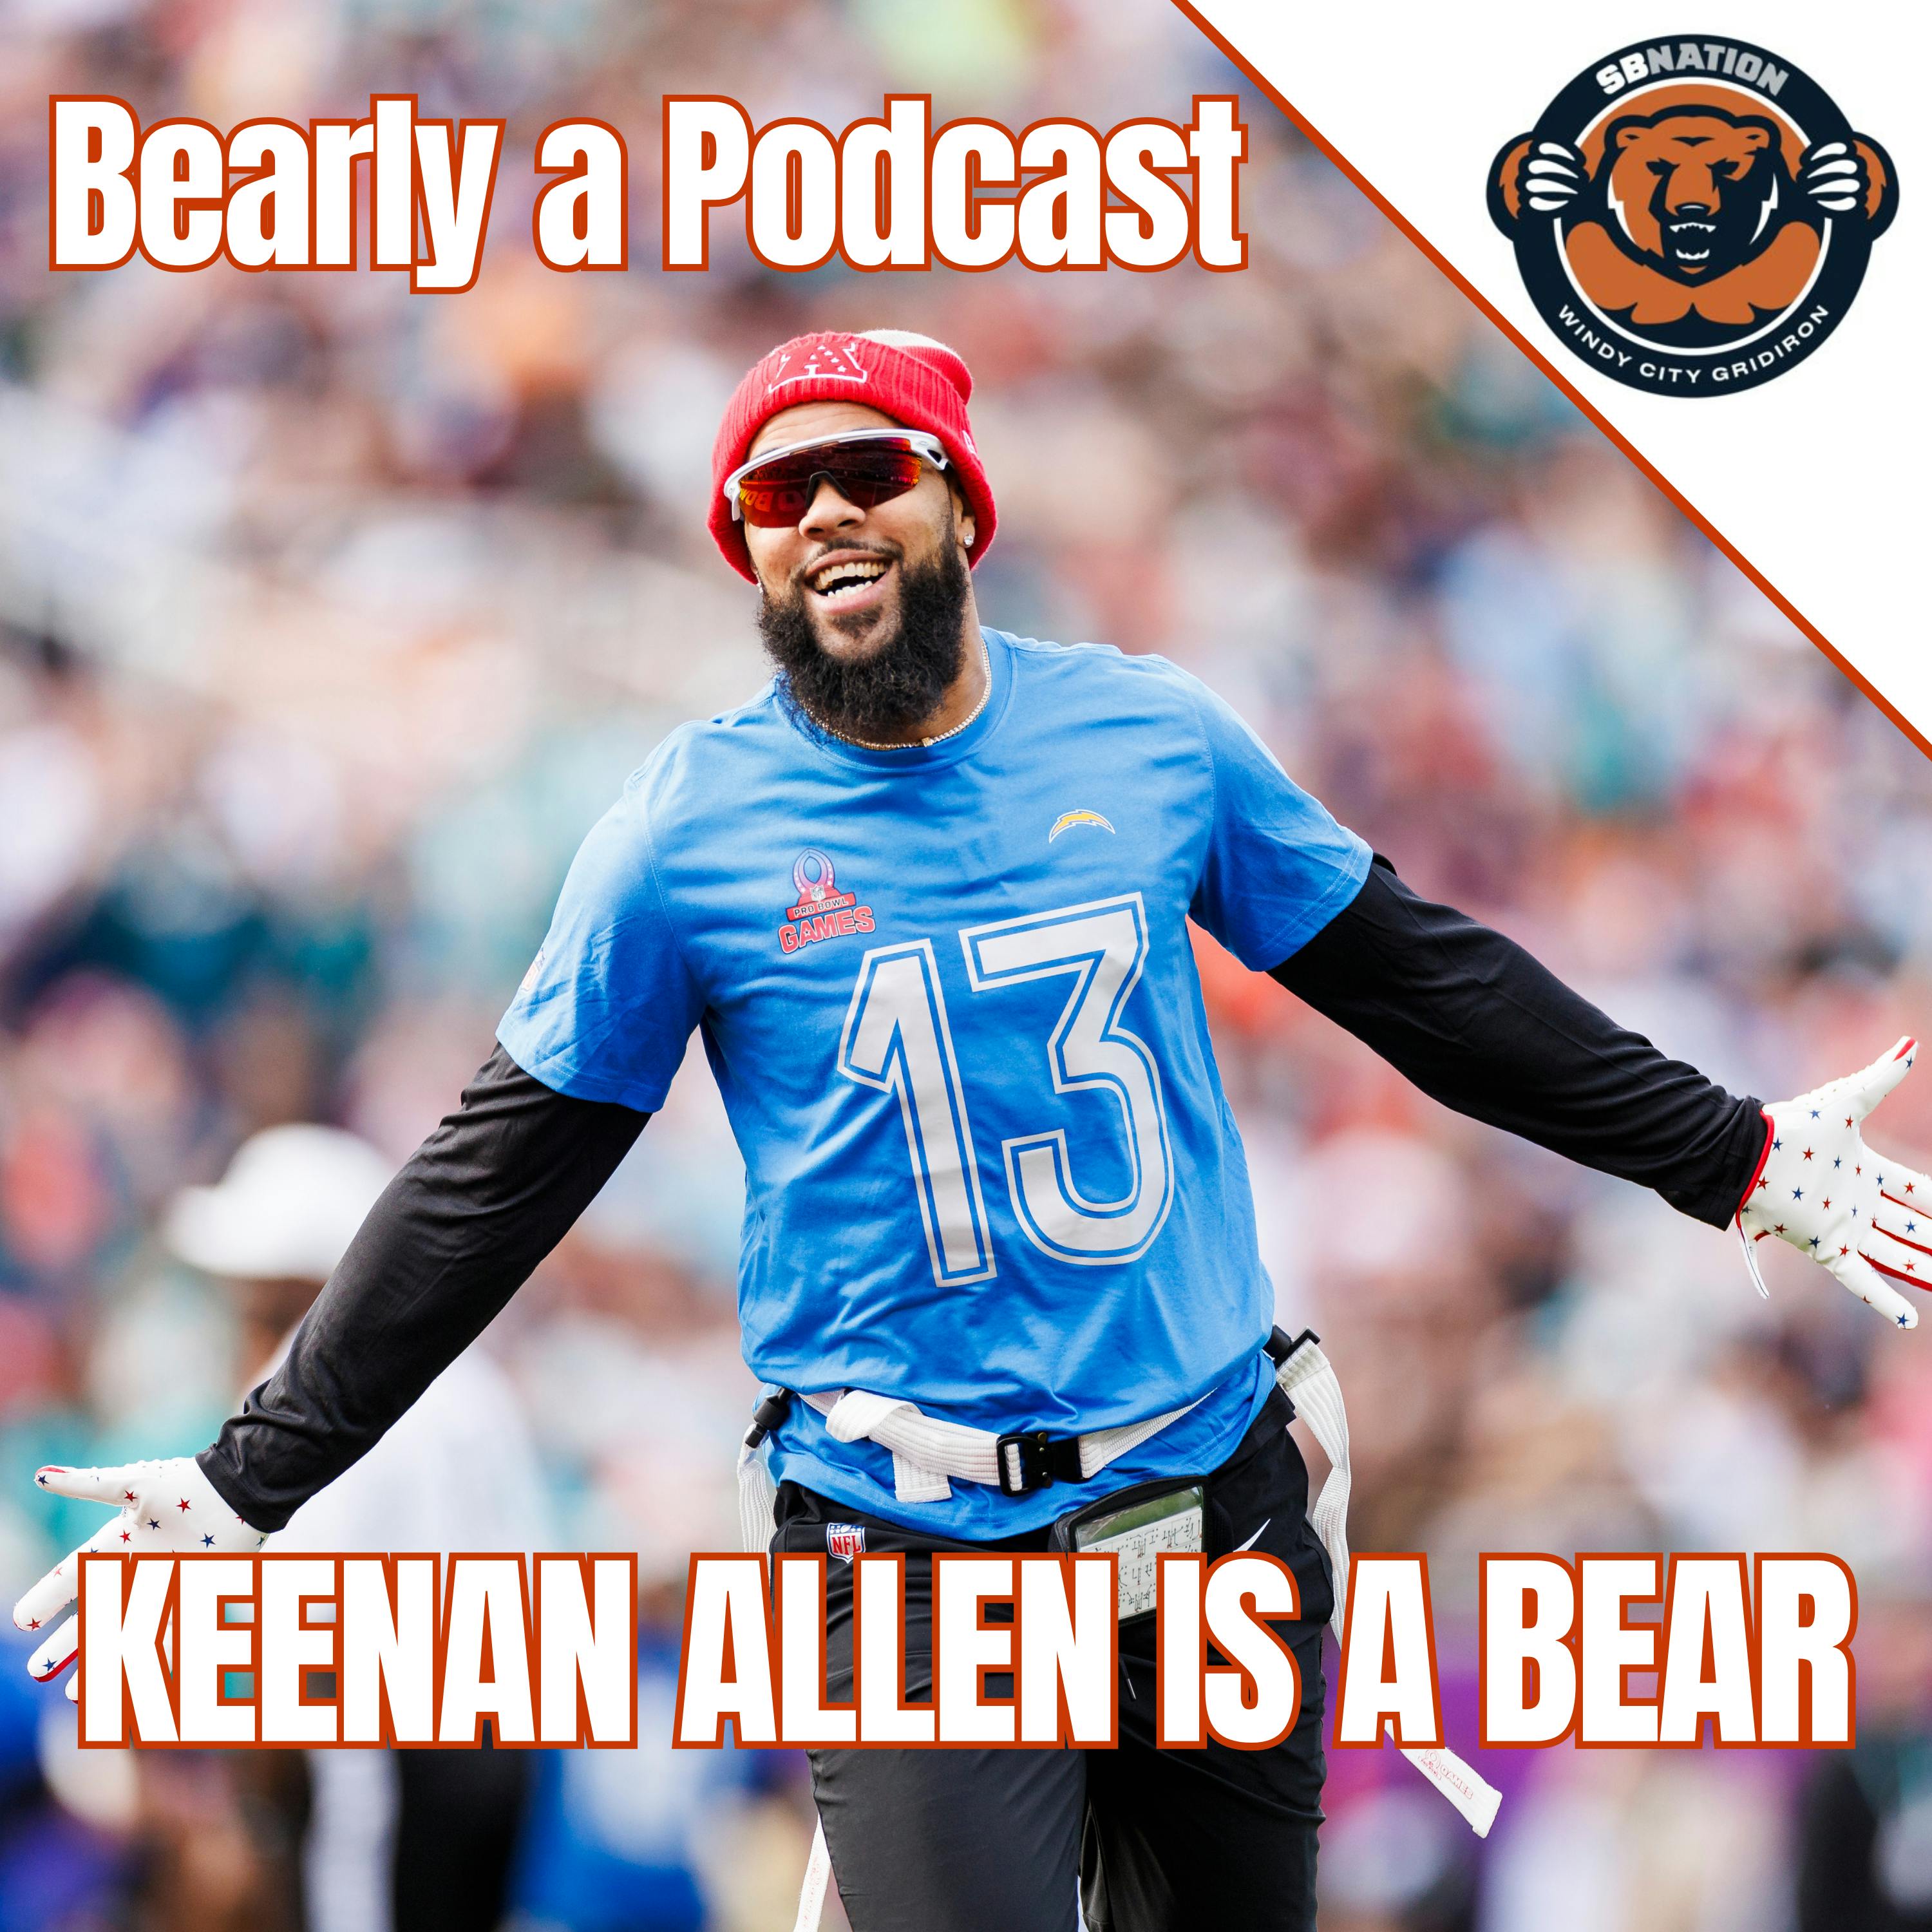 Bearly a Podcast: Keenan Allen is a Chicago Bear!